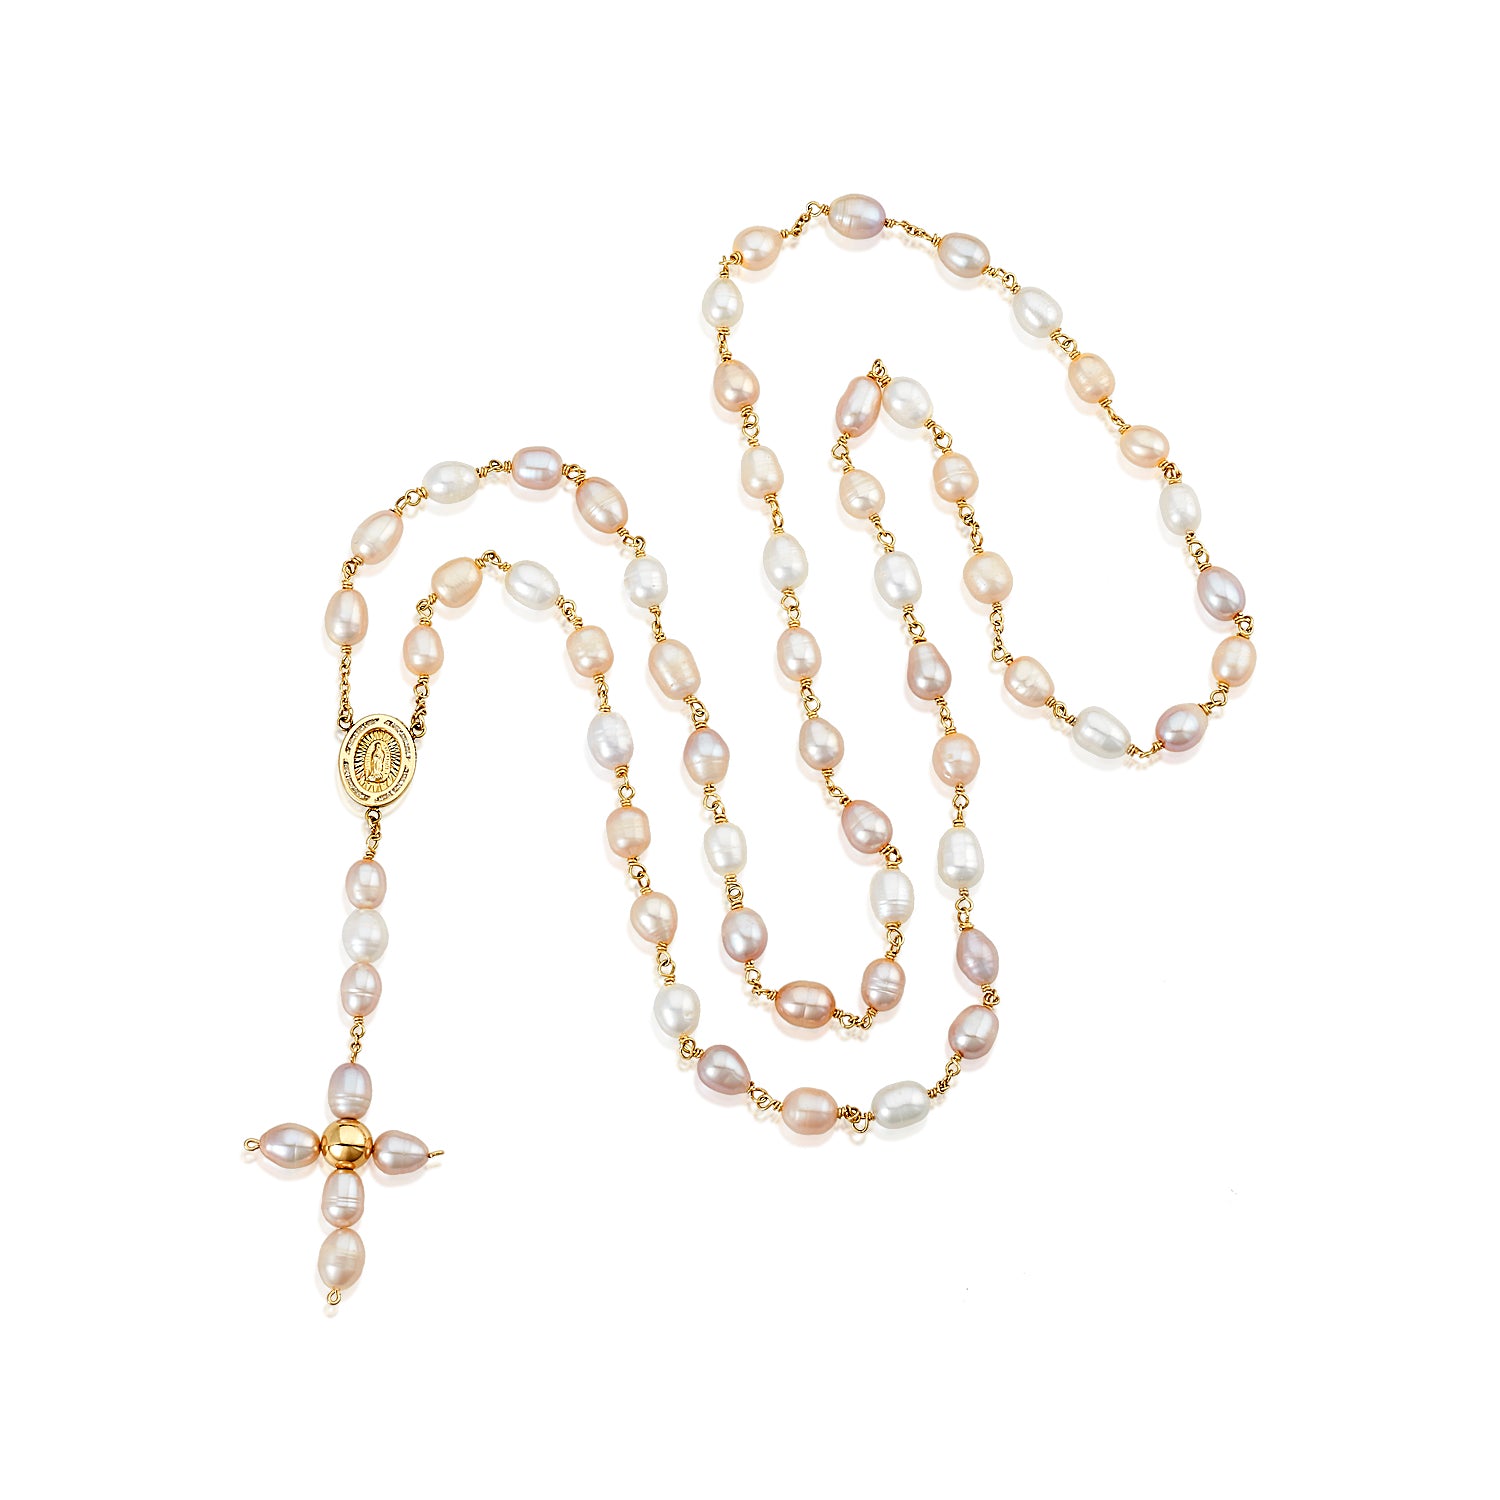 Mother of Pearl Rosary Beads with 'Virgin Mary' Icon – Gold Fill